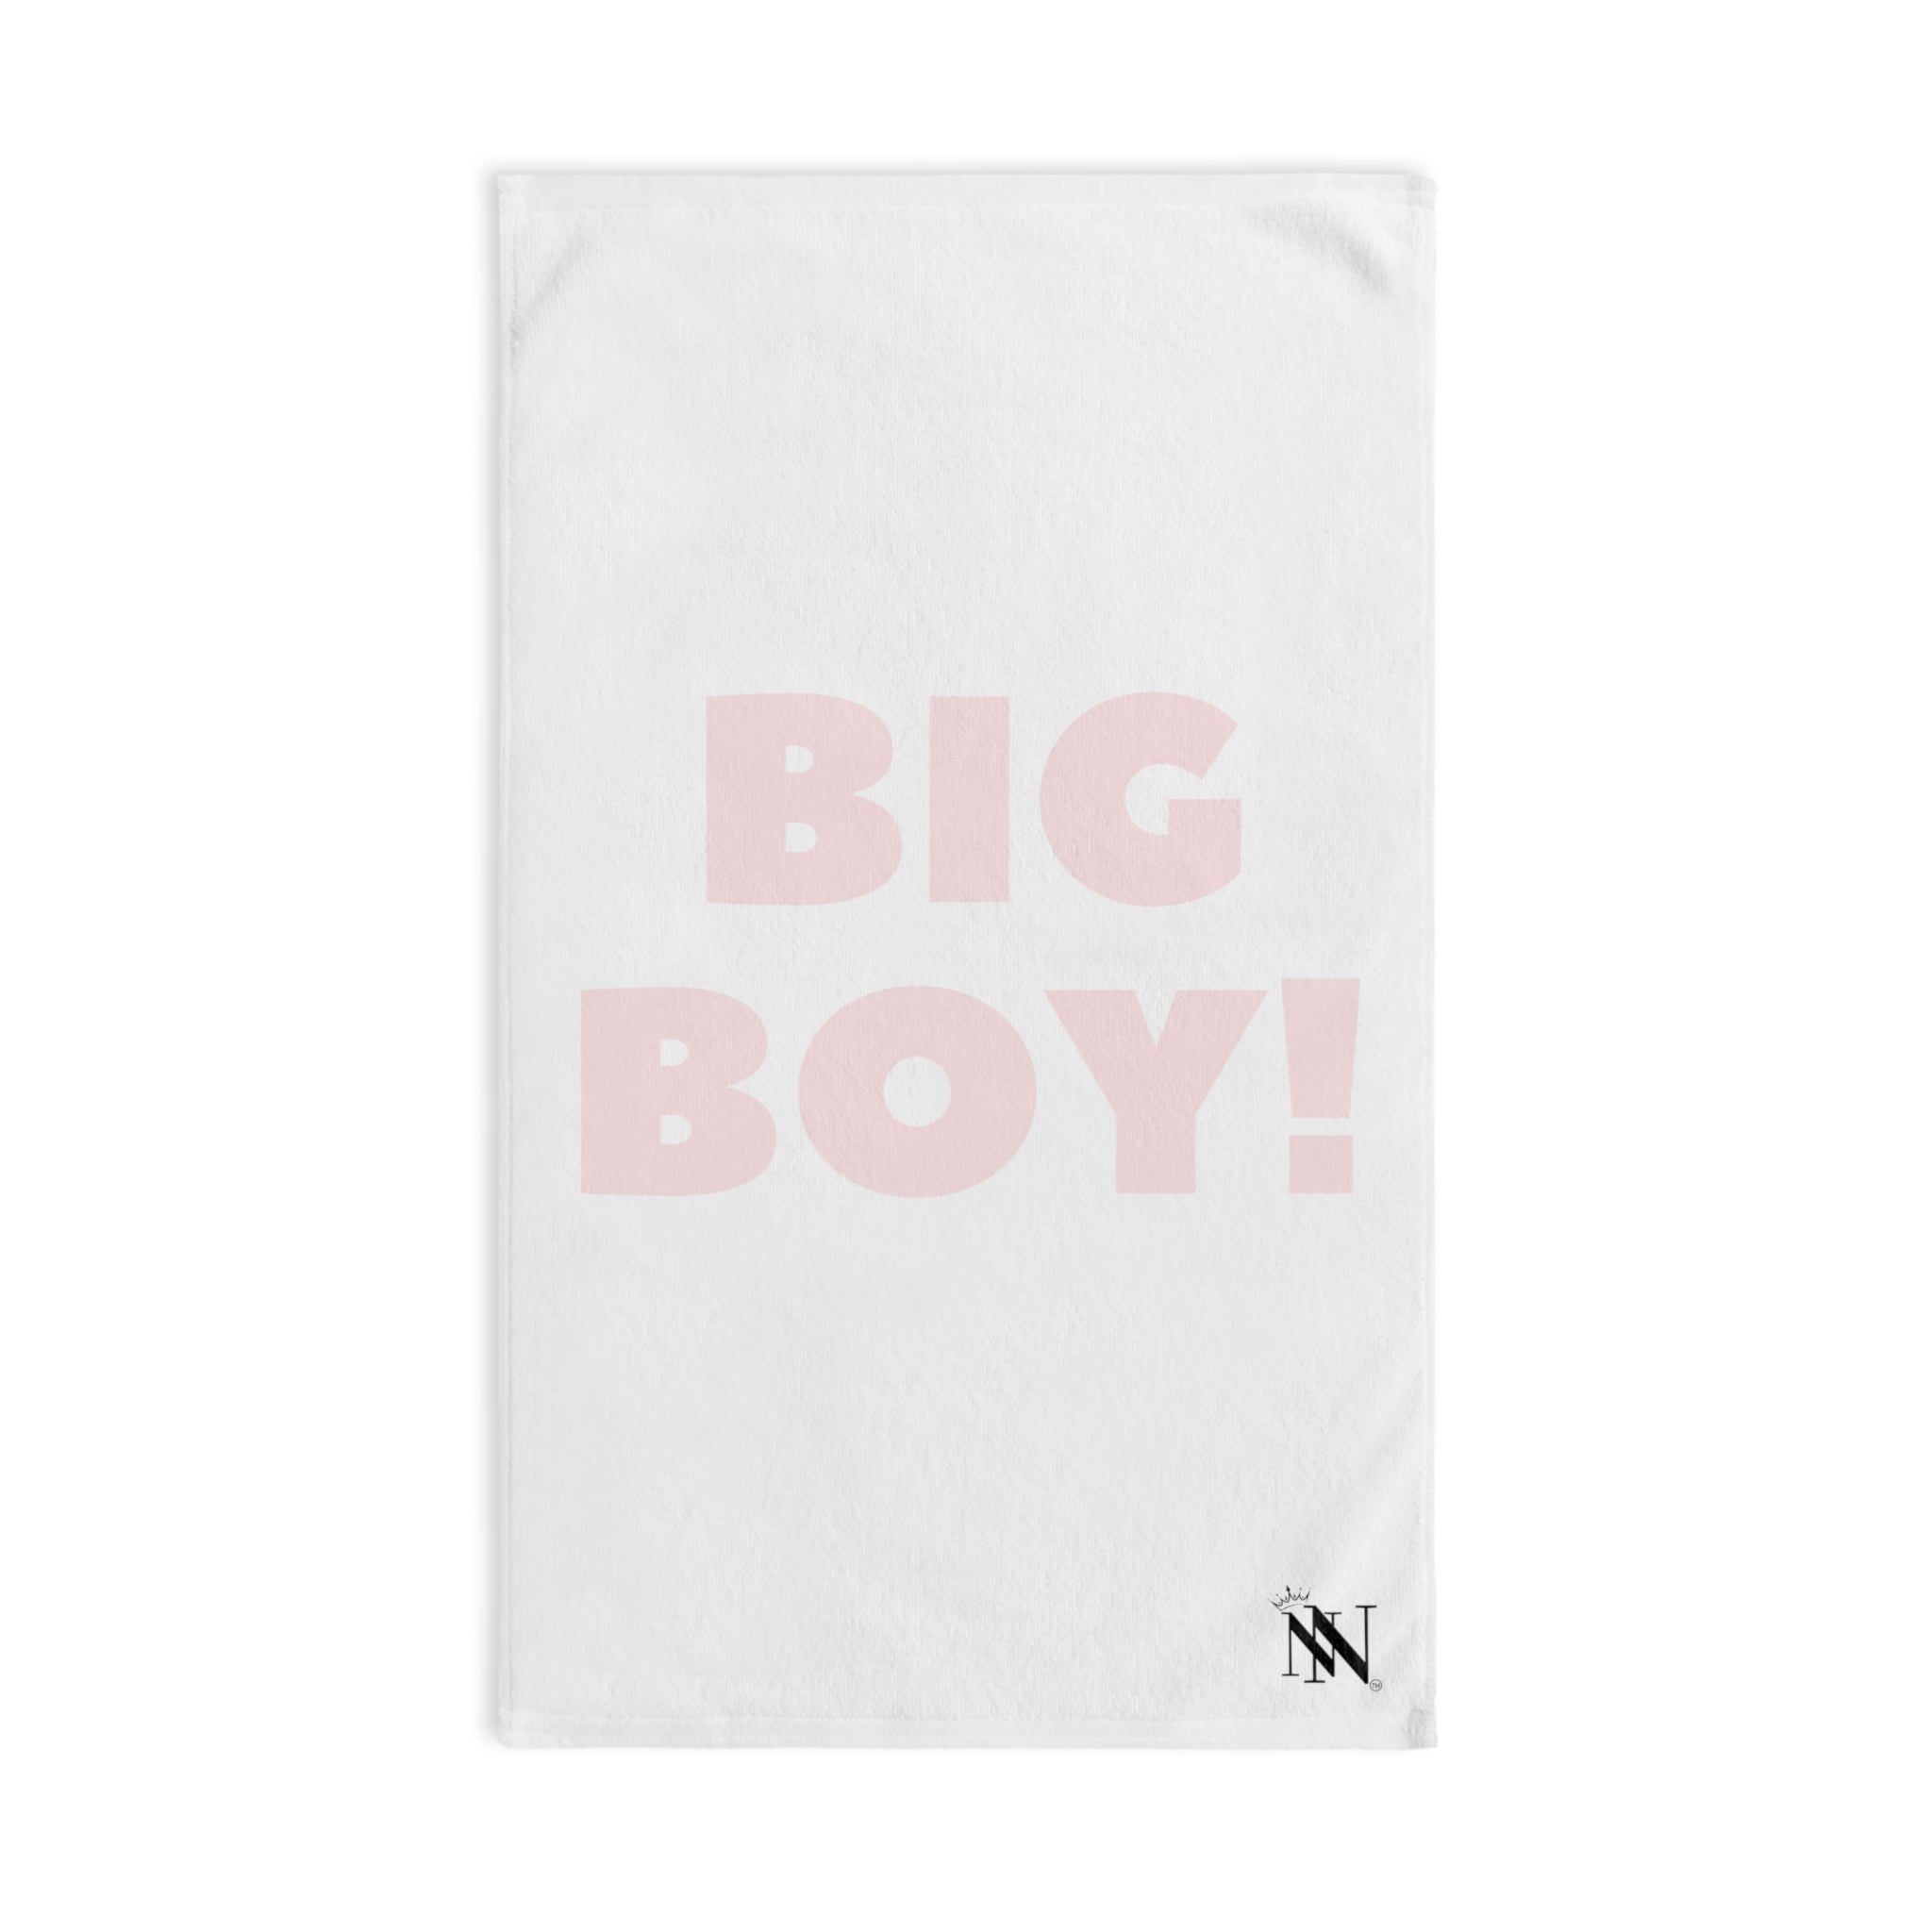 Big Boy Pink White | Funny Gifts for Men - Gifts for Him - Birthday Gifts for Men, Him, Her, Husband, Boyfriend, Girlfriend, New Couple Gifts, Fathers & Valentines Day Gifts, Christmas Gifts NECTAR NAPKINS